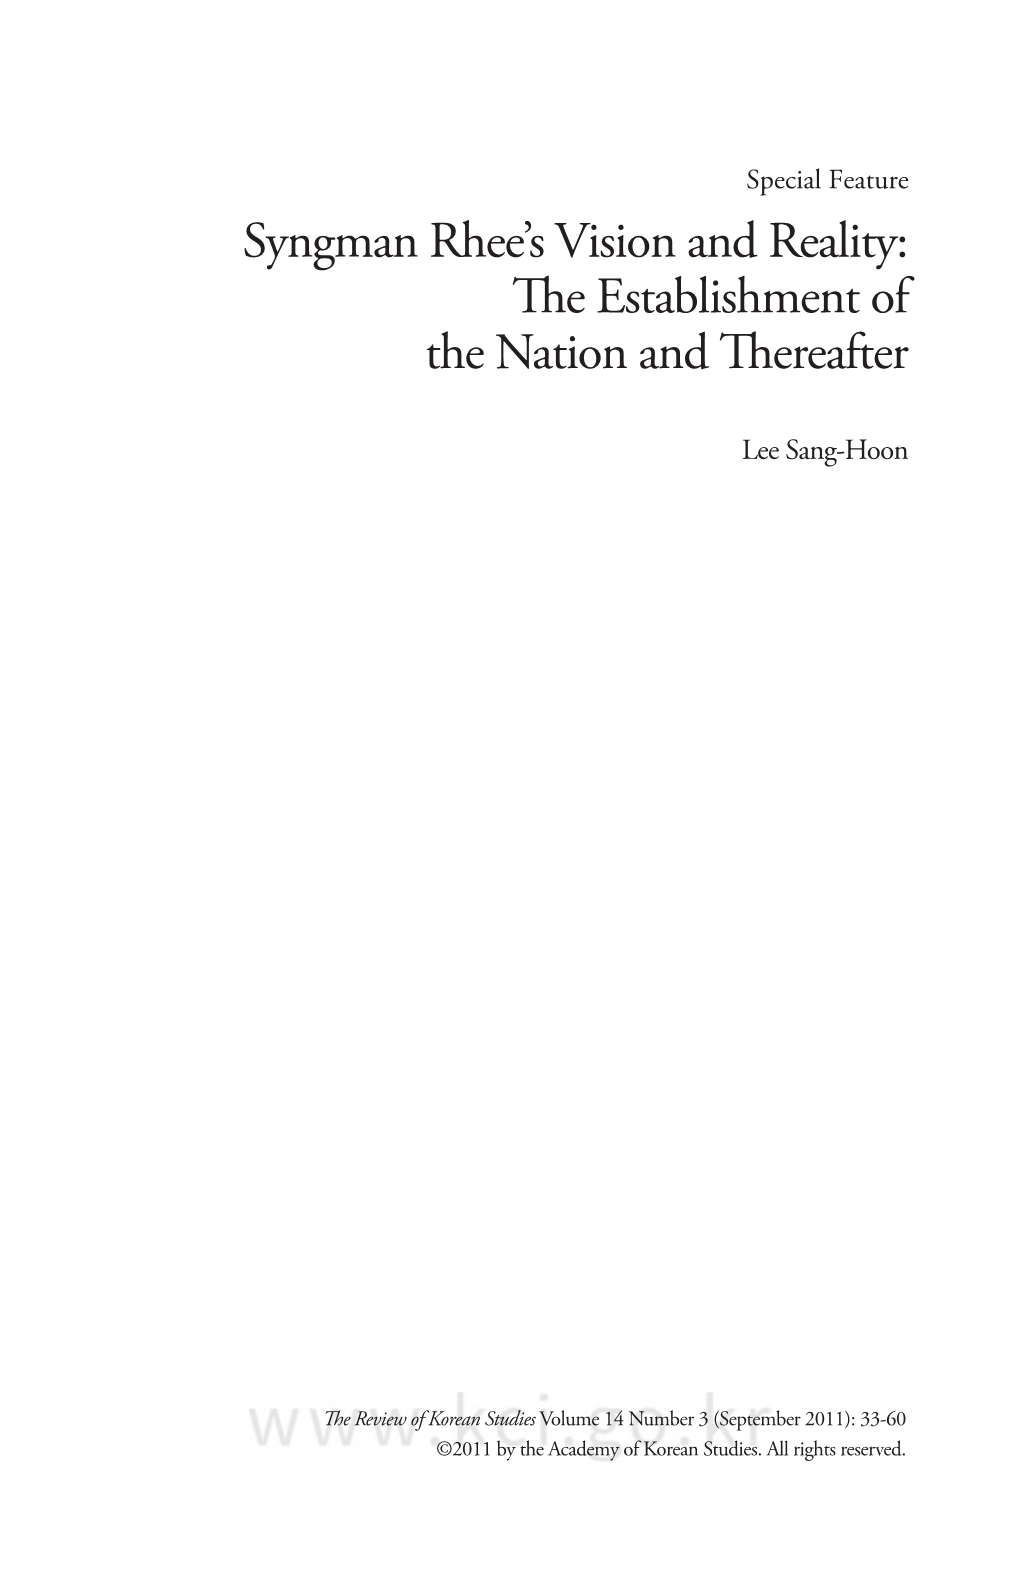 Syngman Rhee's Vision and Reality: the Establishment of the Nation